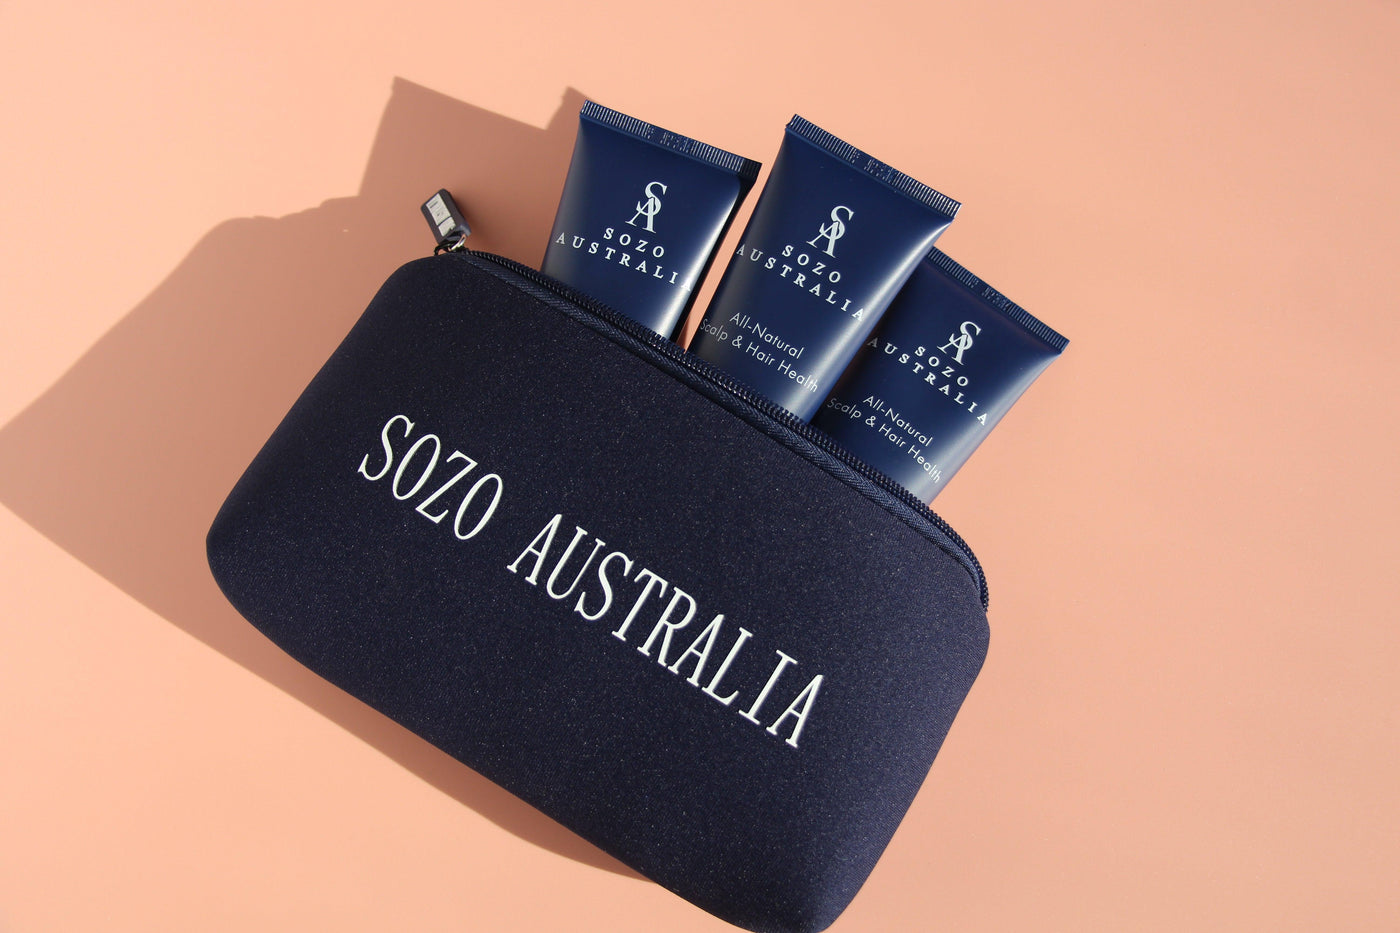 Sozo Australia Hair Travel Kit Containing An All-Natural 60ml Shampoo, Conditioner And Hair Mask With A Free Travel Cosmetic Pouch